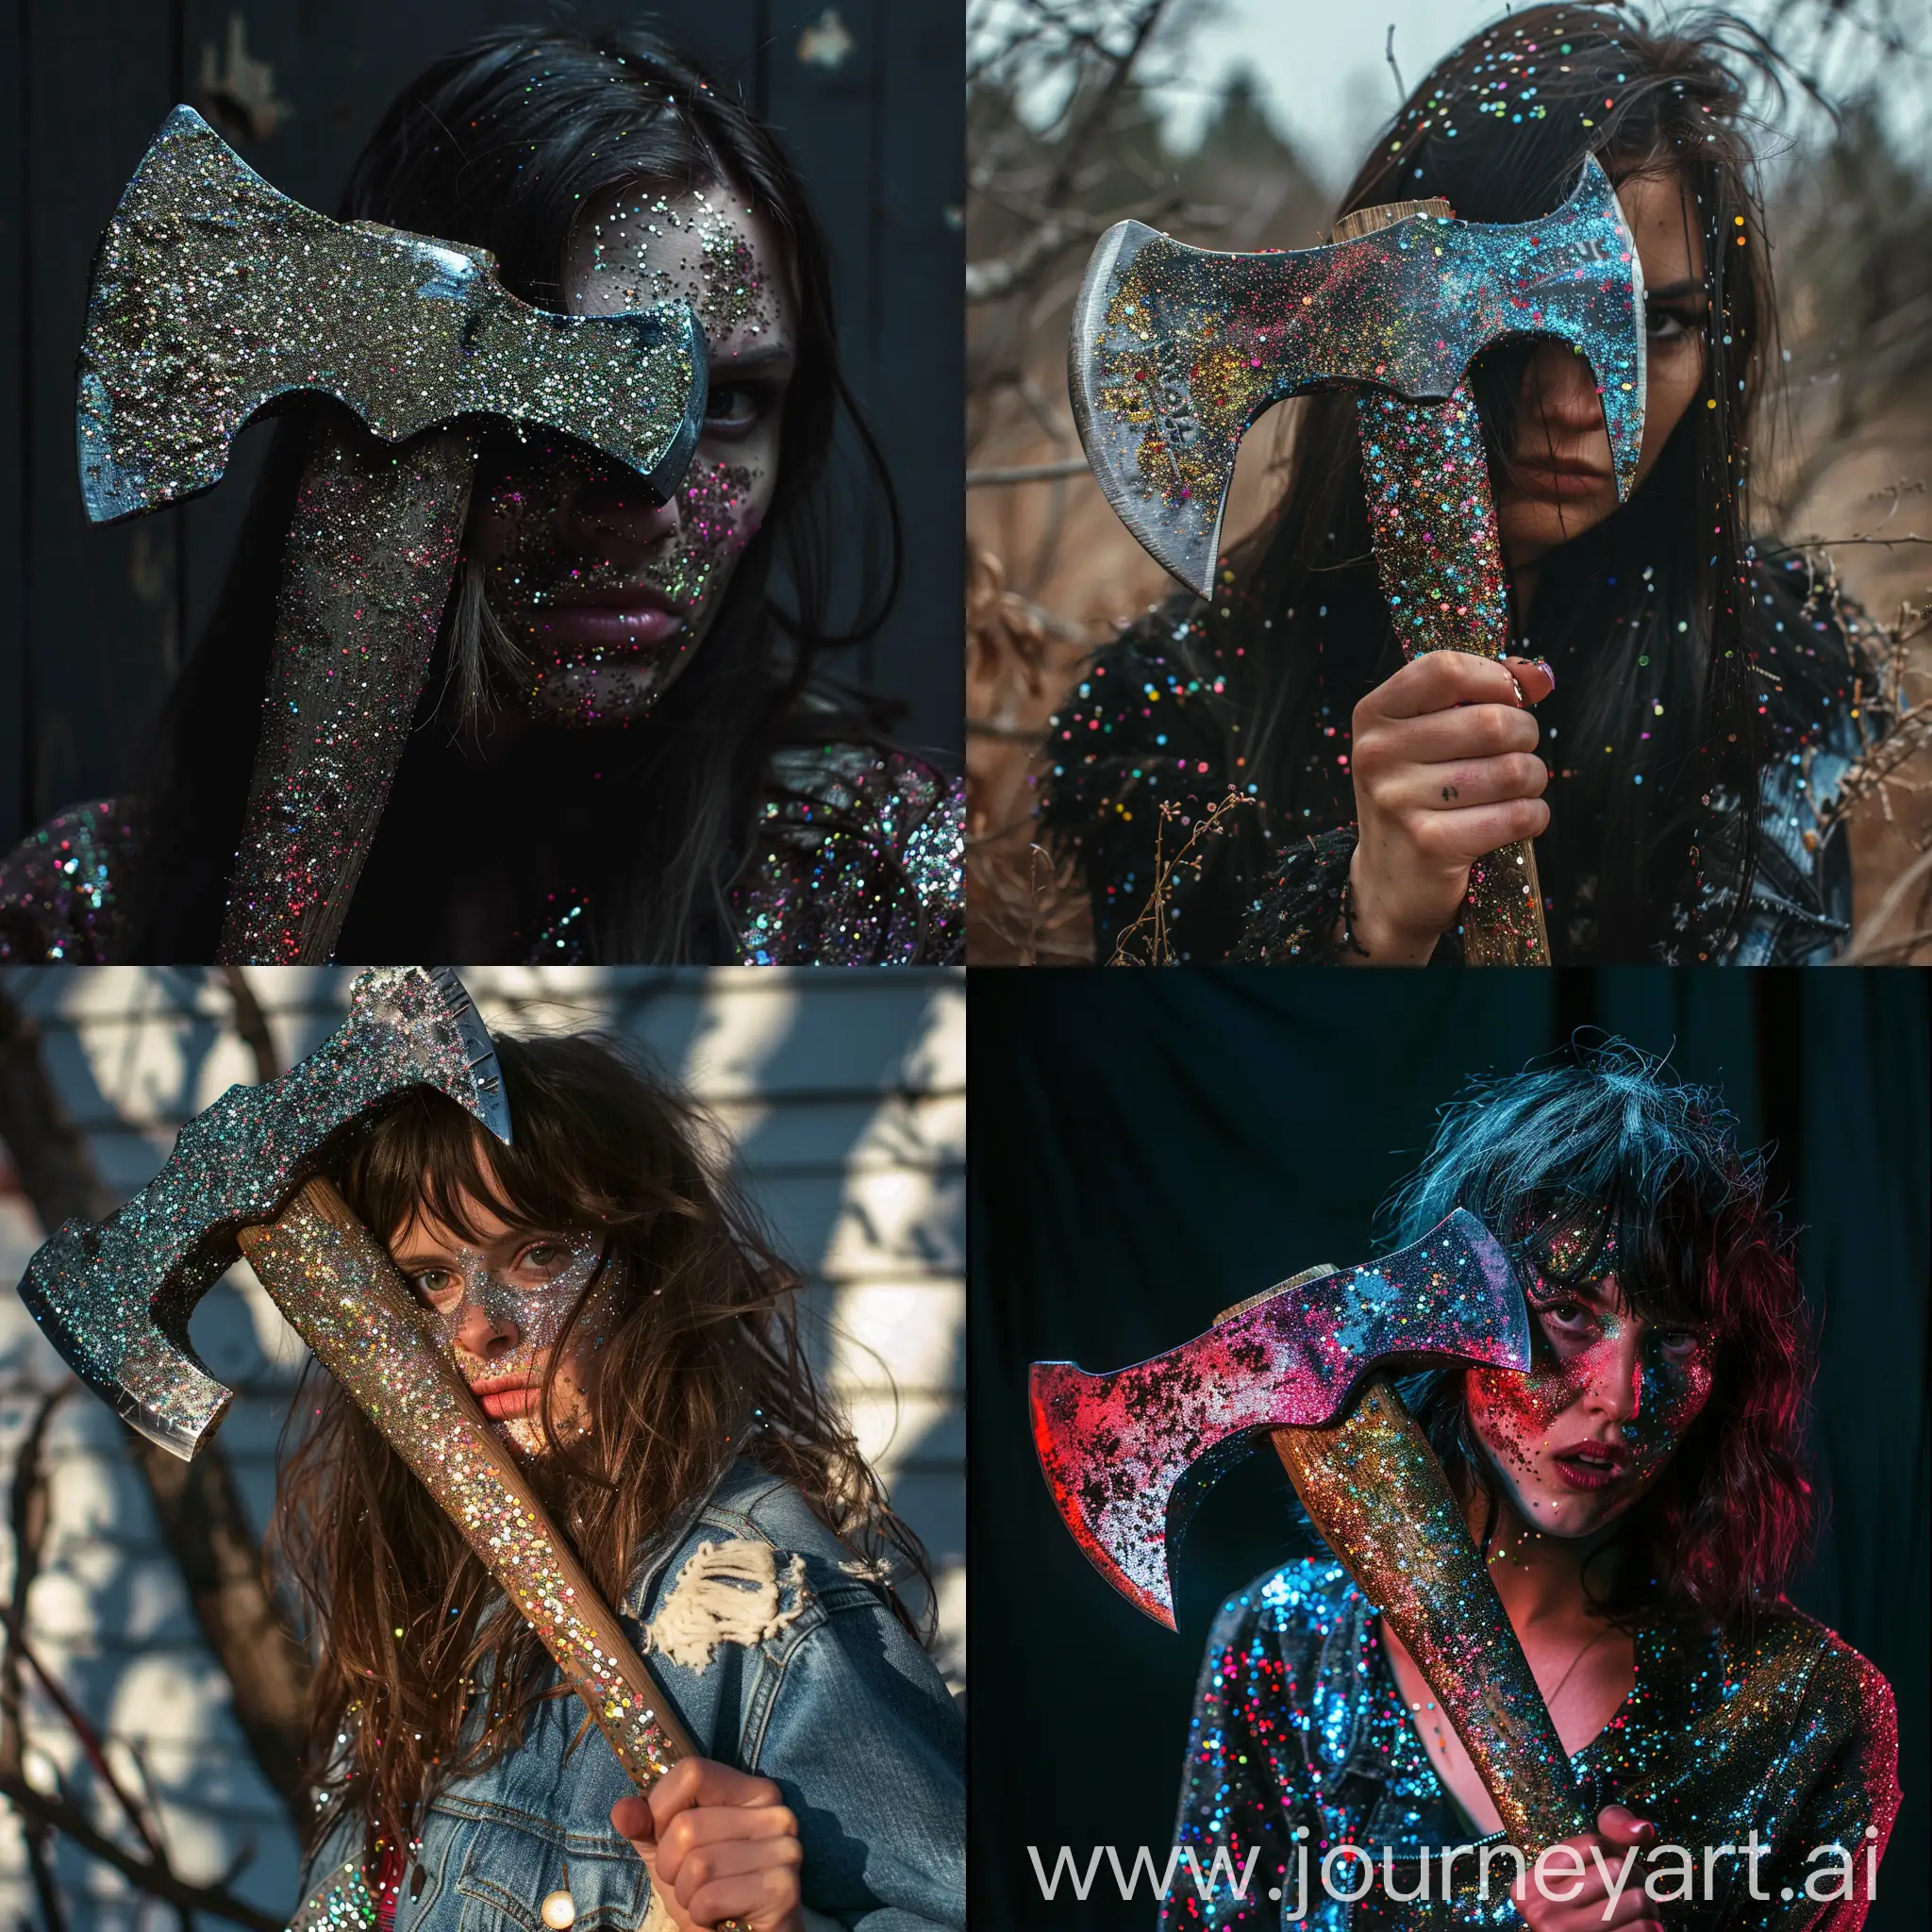 A woman whose ax is covered in glitter